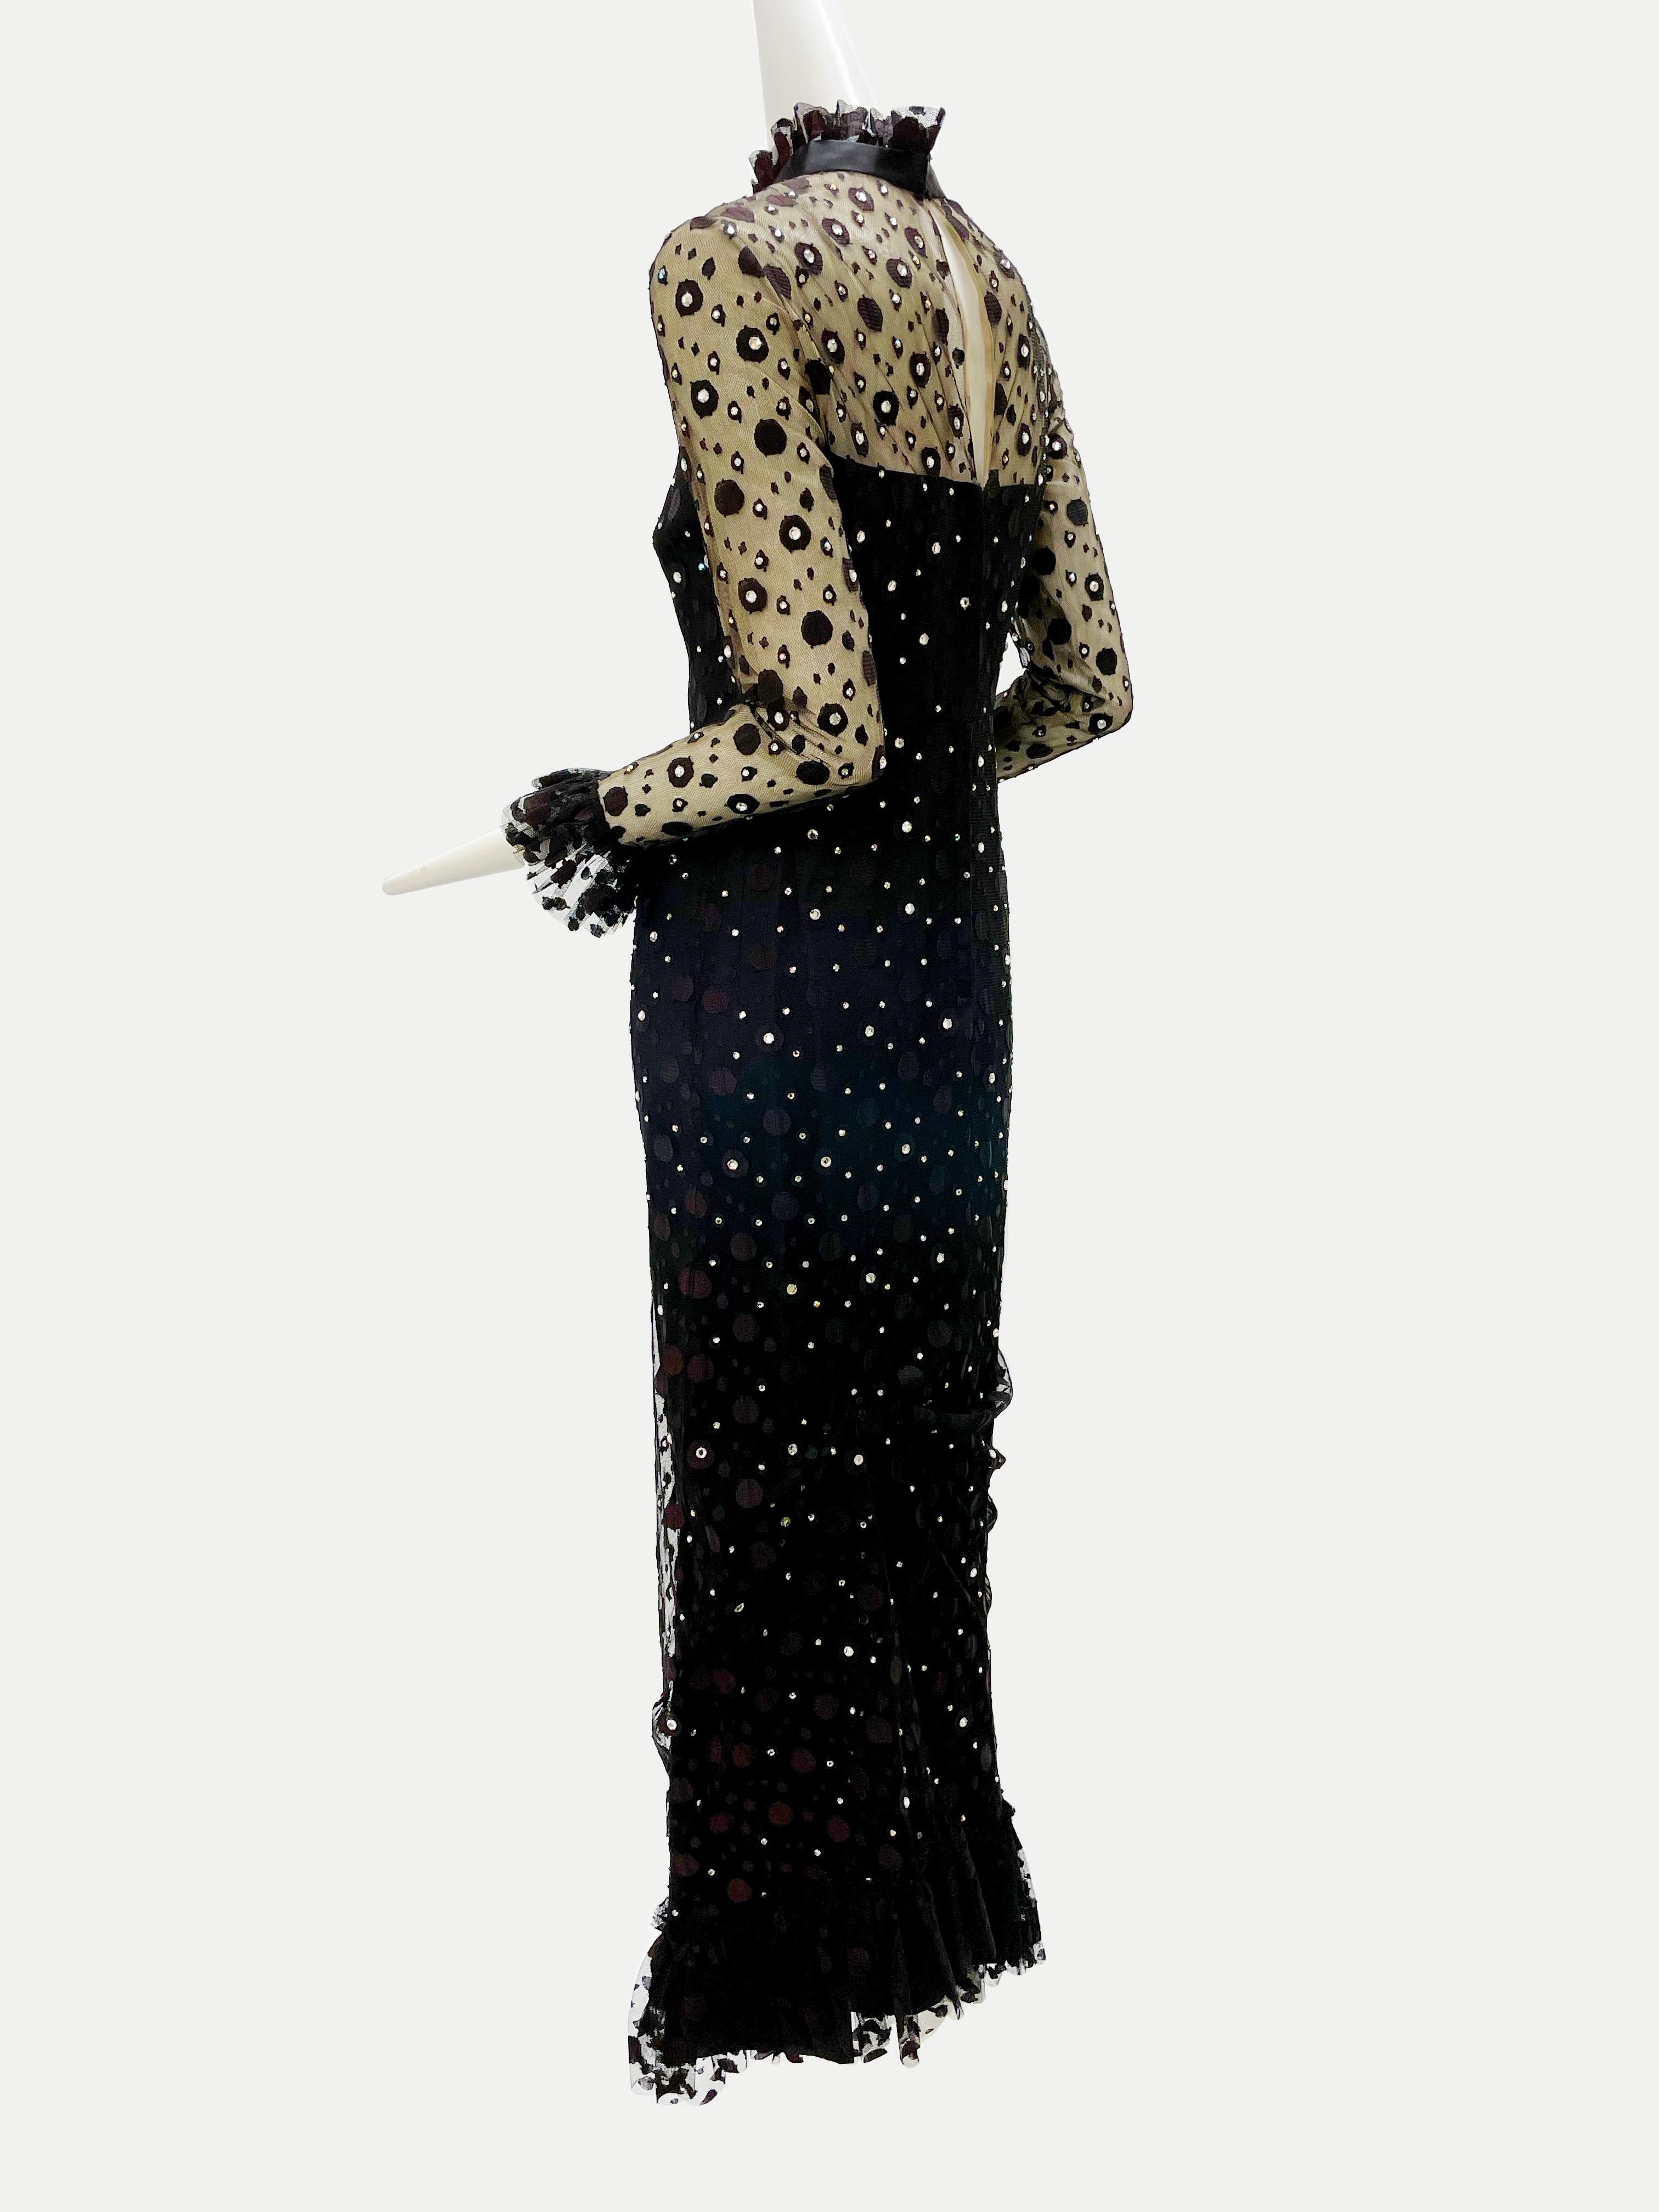 A late 1960s black maxi dress with rhinestone dotted tulle overlay:  Underlayer in black satin with a sweetheart neckline. Overlay is dotted tulle with prong-set rhinestone embellishment and ruffled, banded collar, cuffs and hemline. Fits a modern